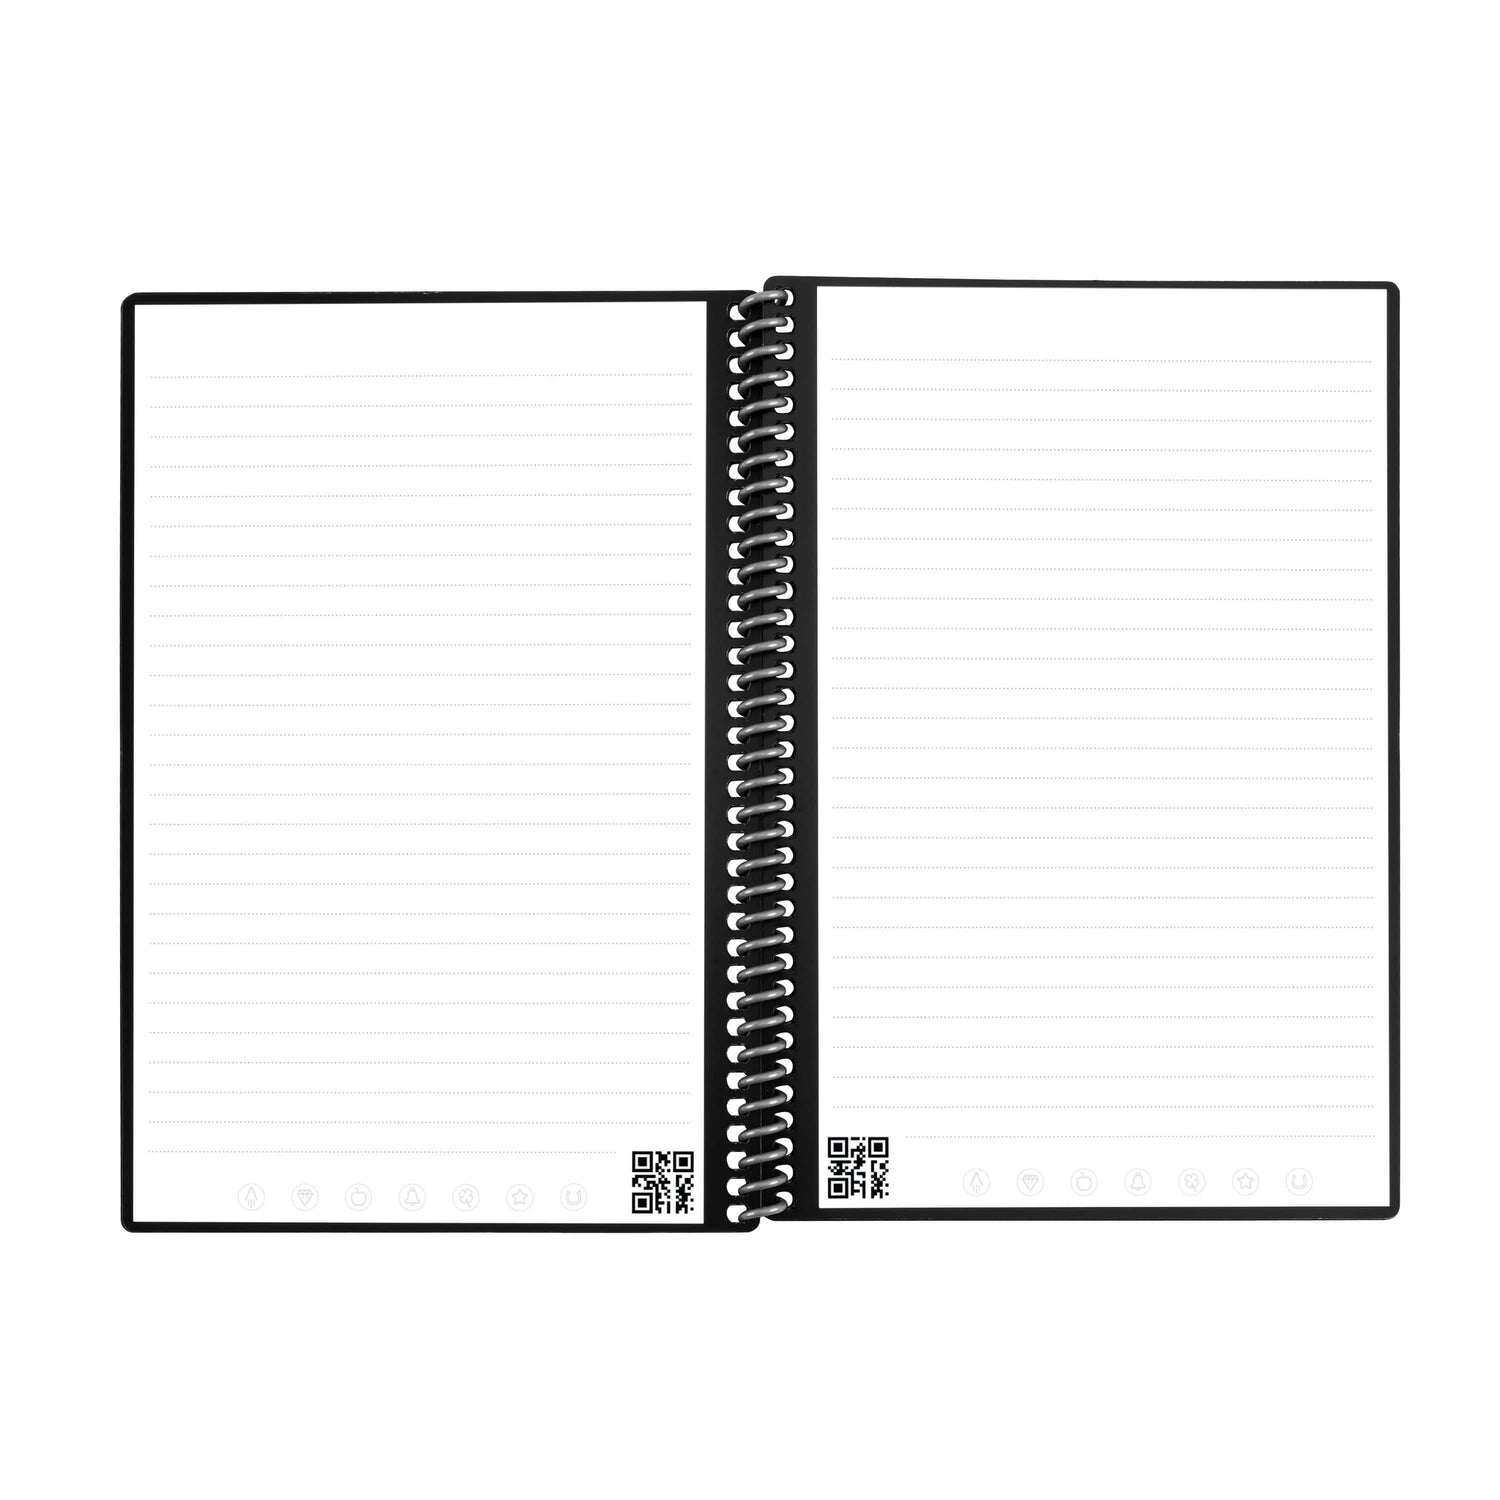 Top Bound Durable Spiral Notebooks with 300 Lined Pages, Portable